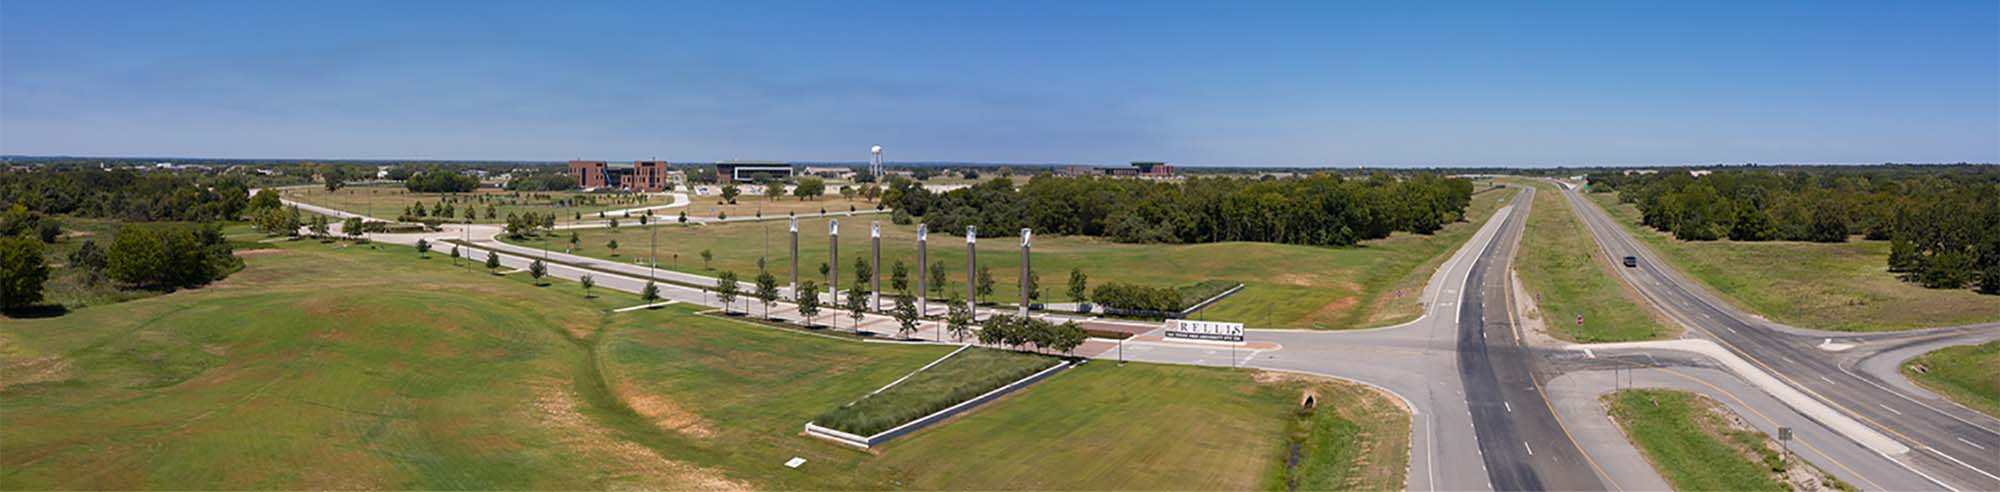 Panoramic photo of the entrance to Rellis Campus in Bryan.